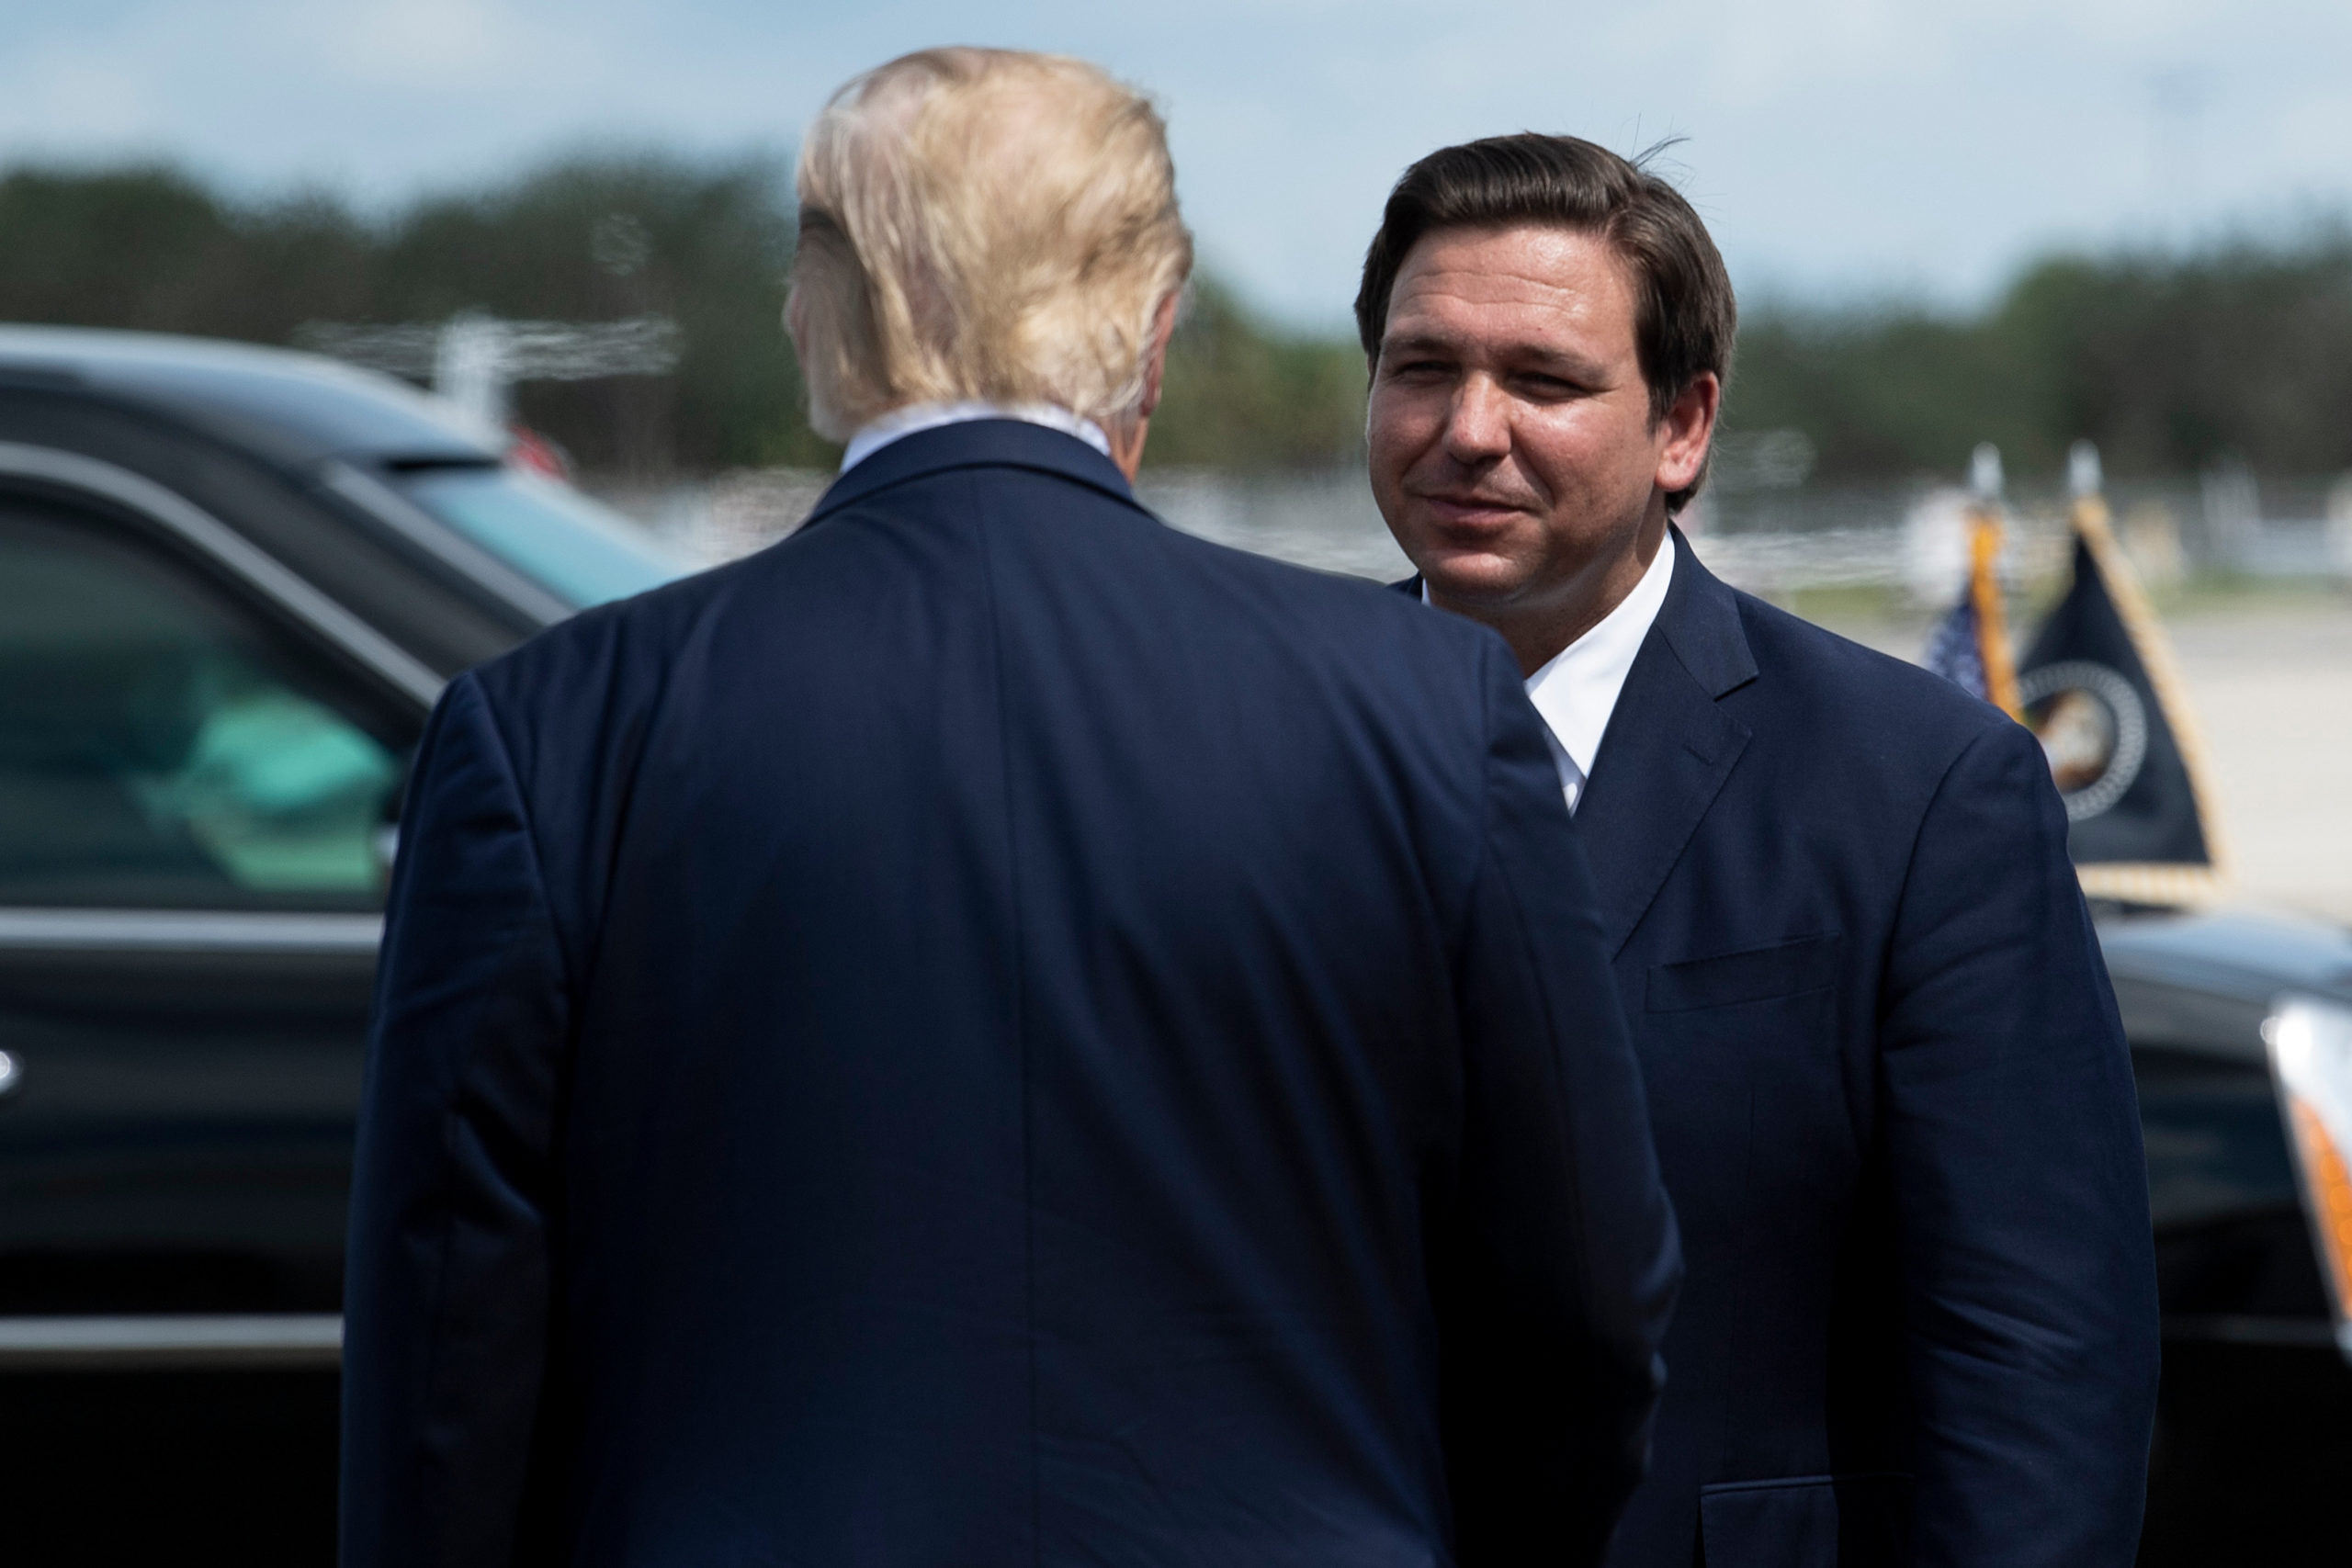 US President Donald Trump is greeted by Florida Governor Ron DeSantis at Southwest Florida International Airport October 16, 2020, in Fort Myers, Florida. 